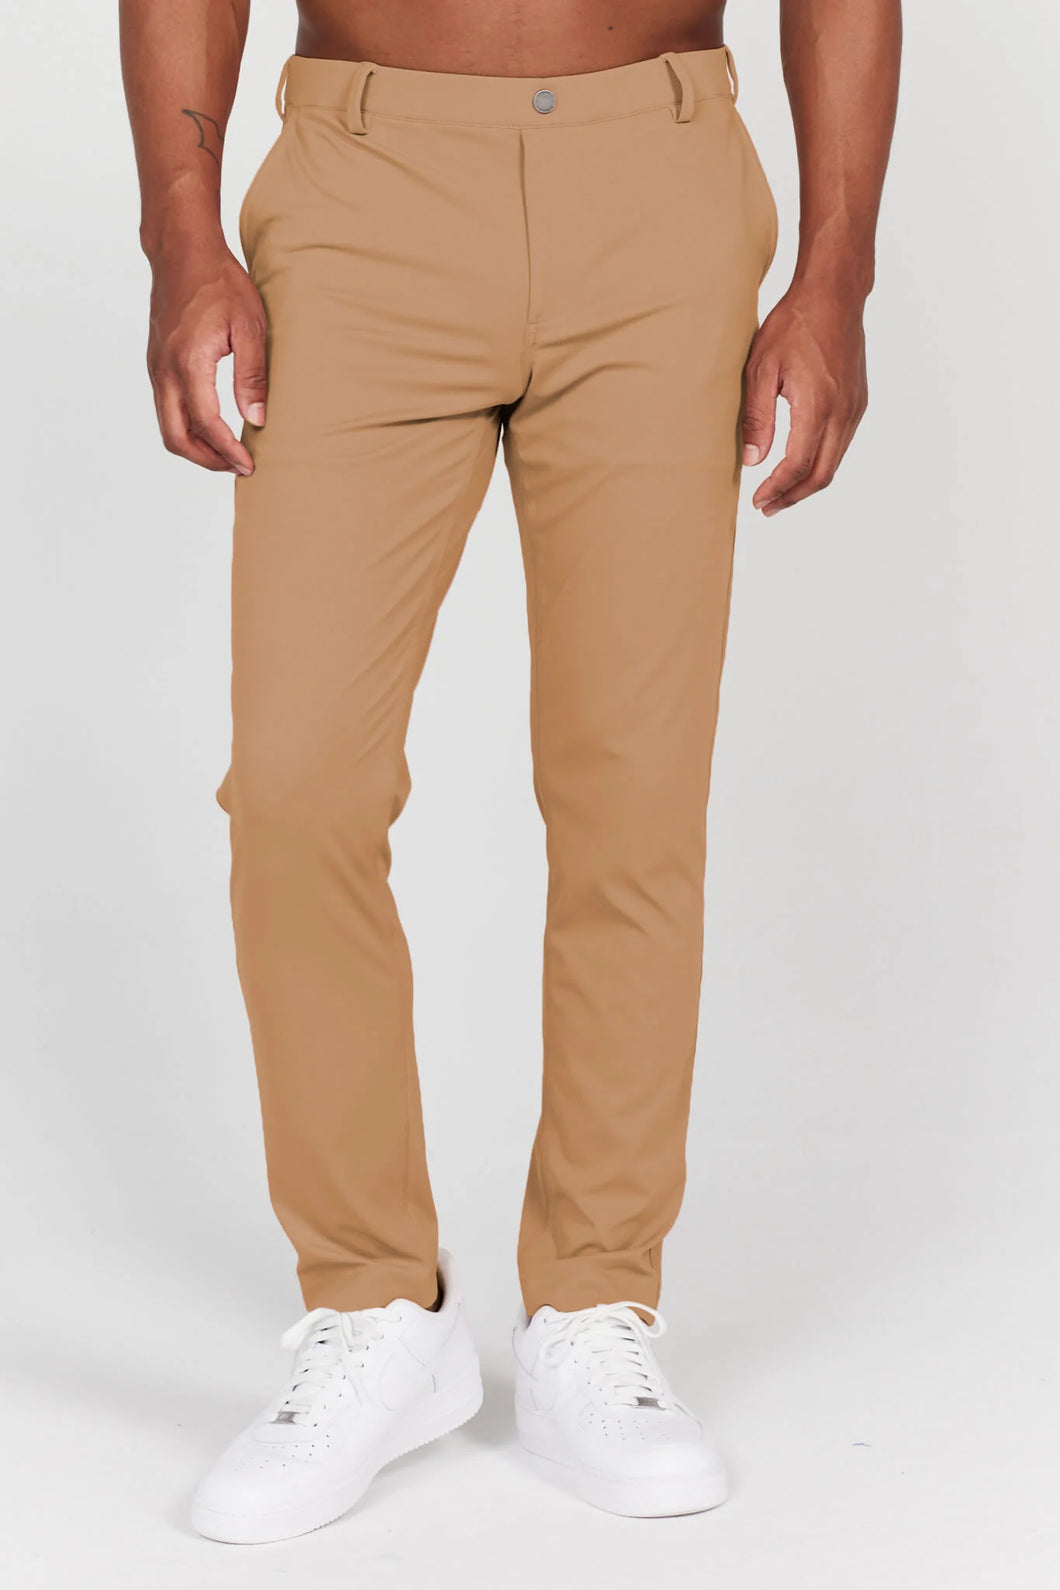 Redvanly Bradley Trouser in Cappuccino